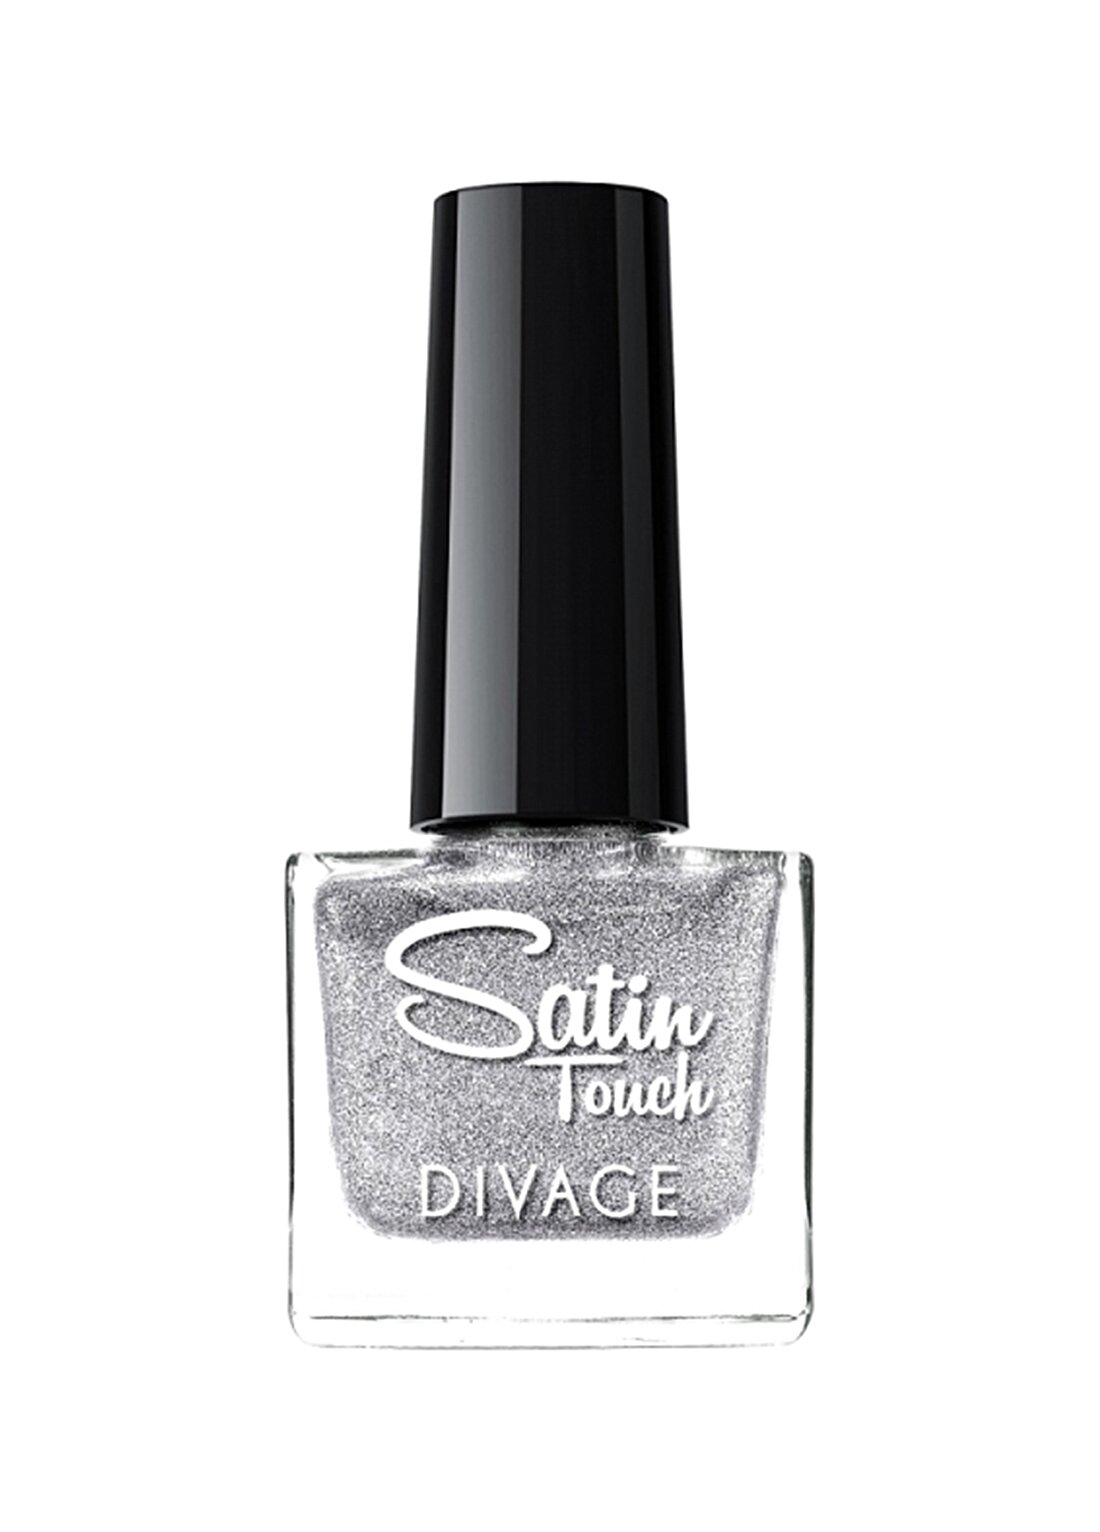 Divage With Pearls Satin Touch No01 Oje